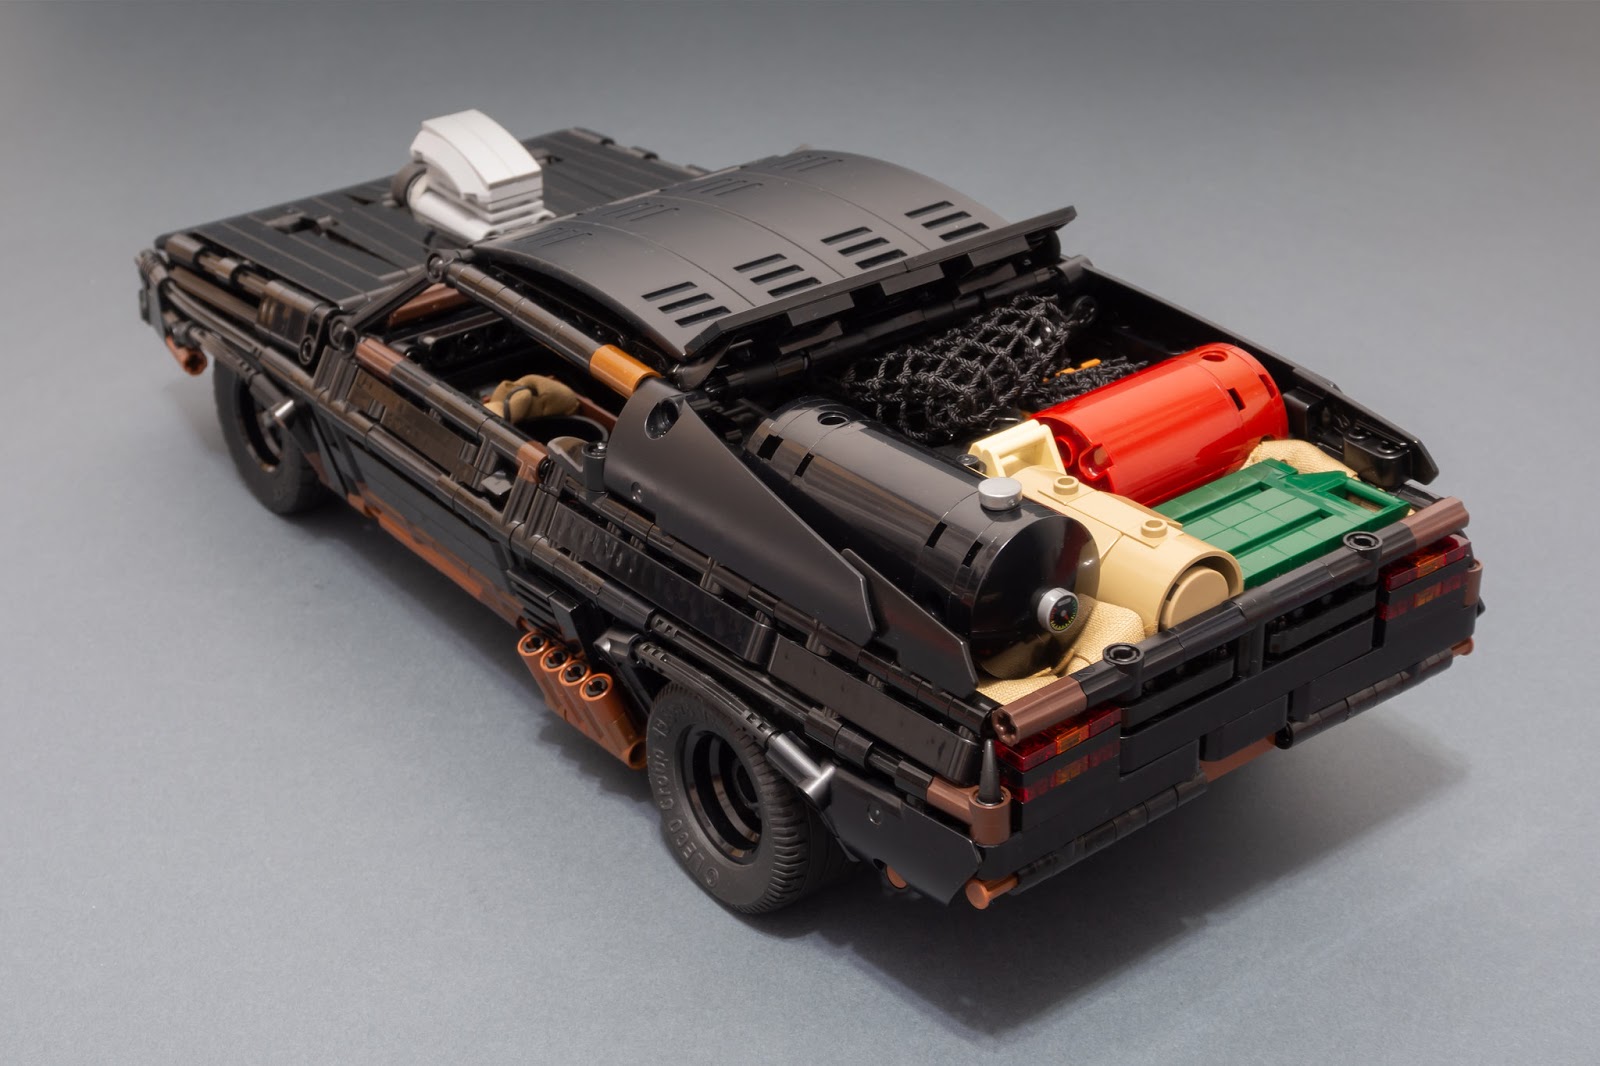 This is the Mad Max LEGO version of the Black Interceptor